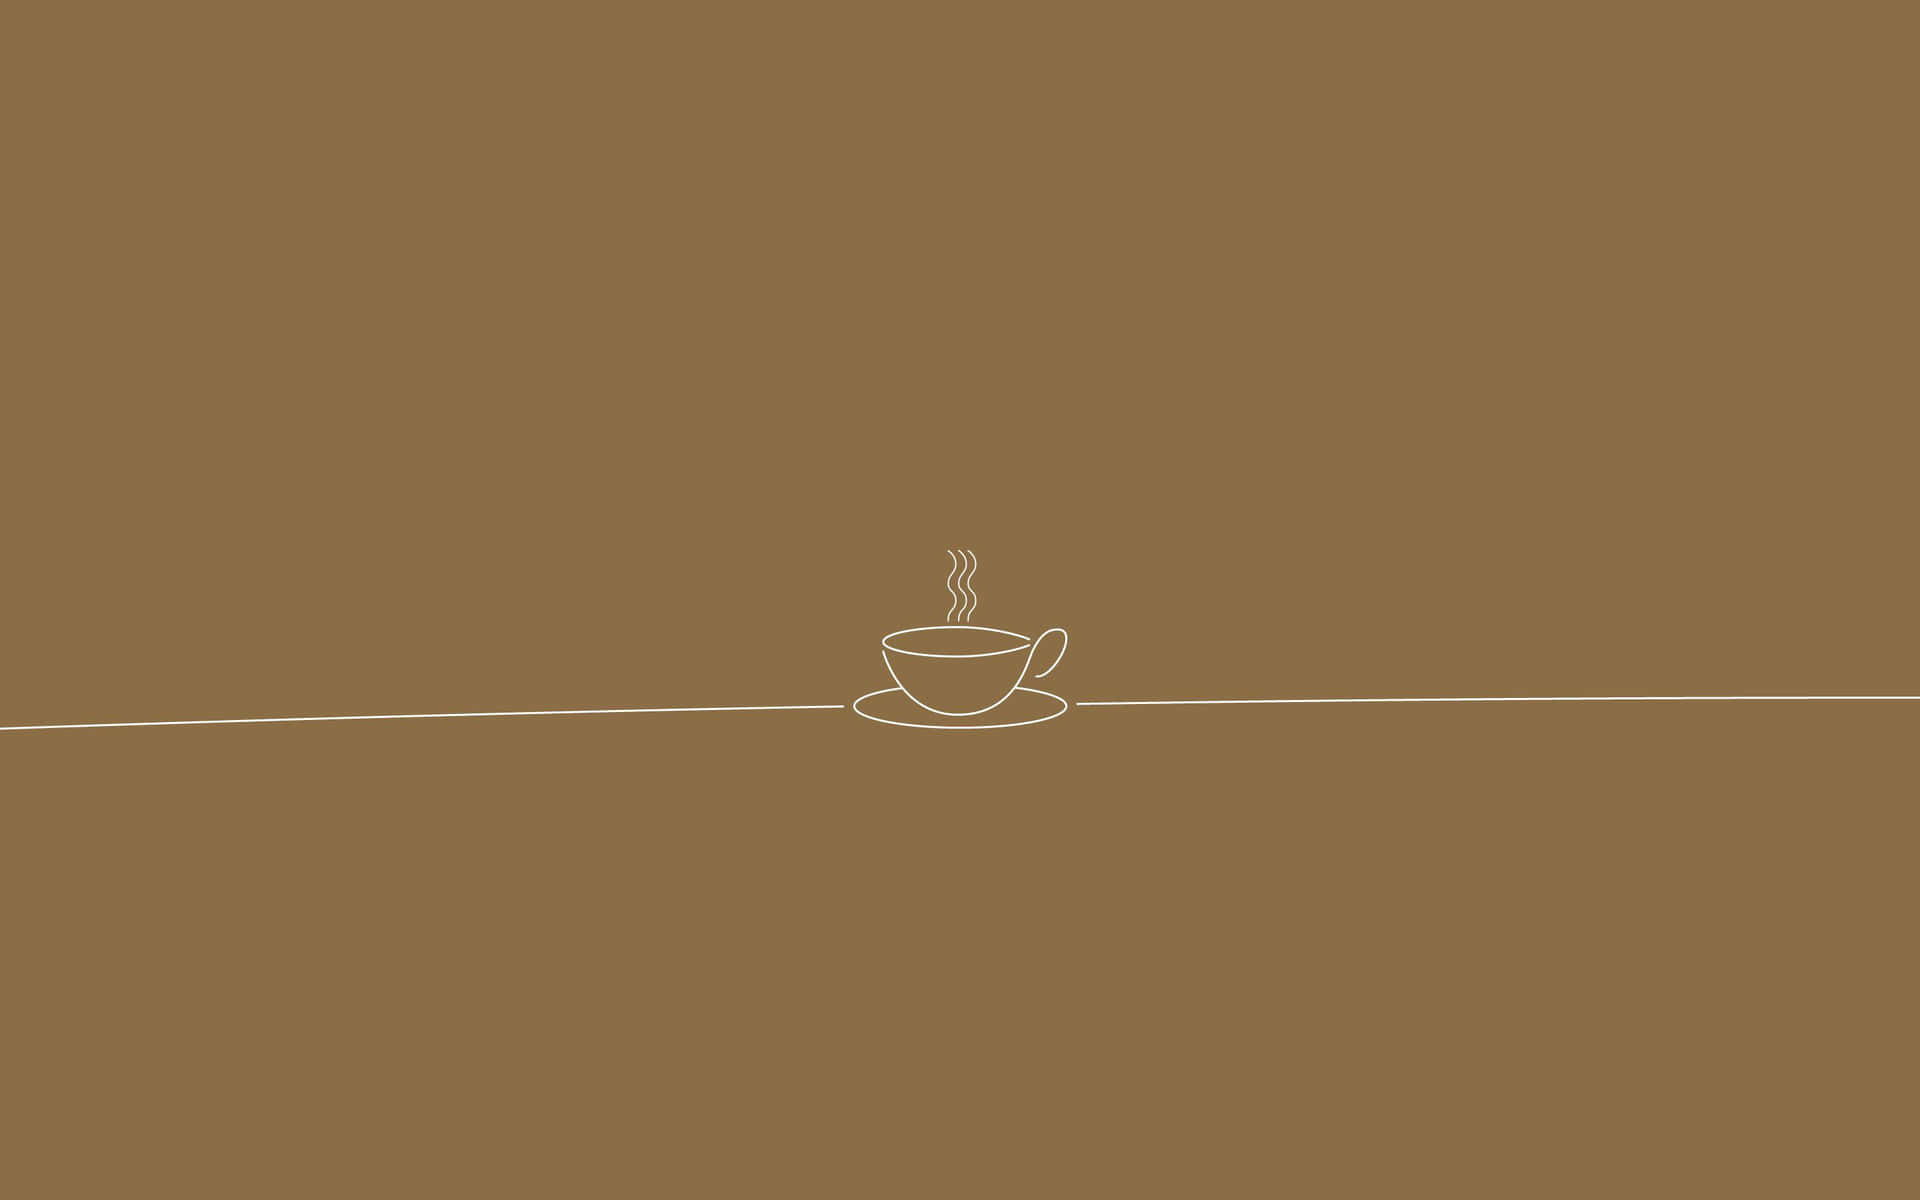 Brown Pastel Aesthetic Minimalist Coffee Cup Background